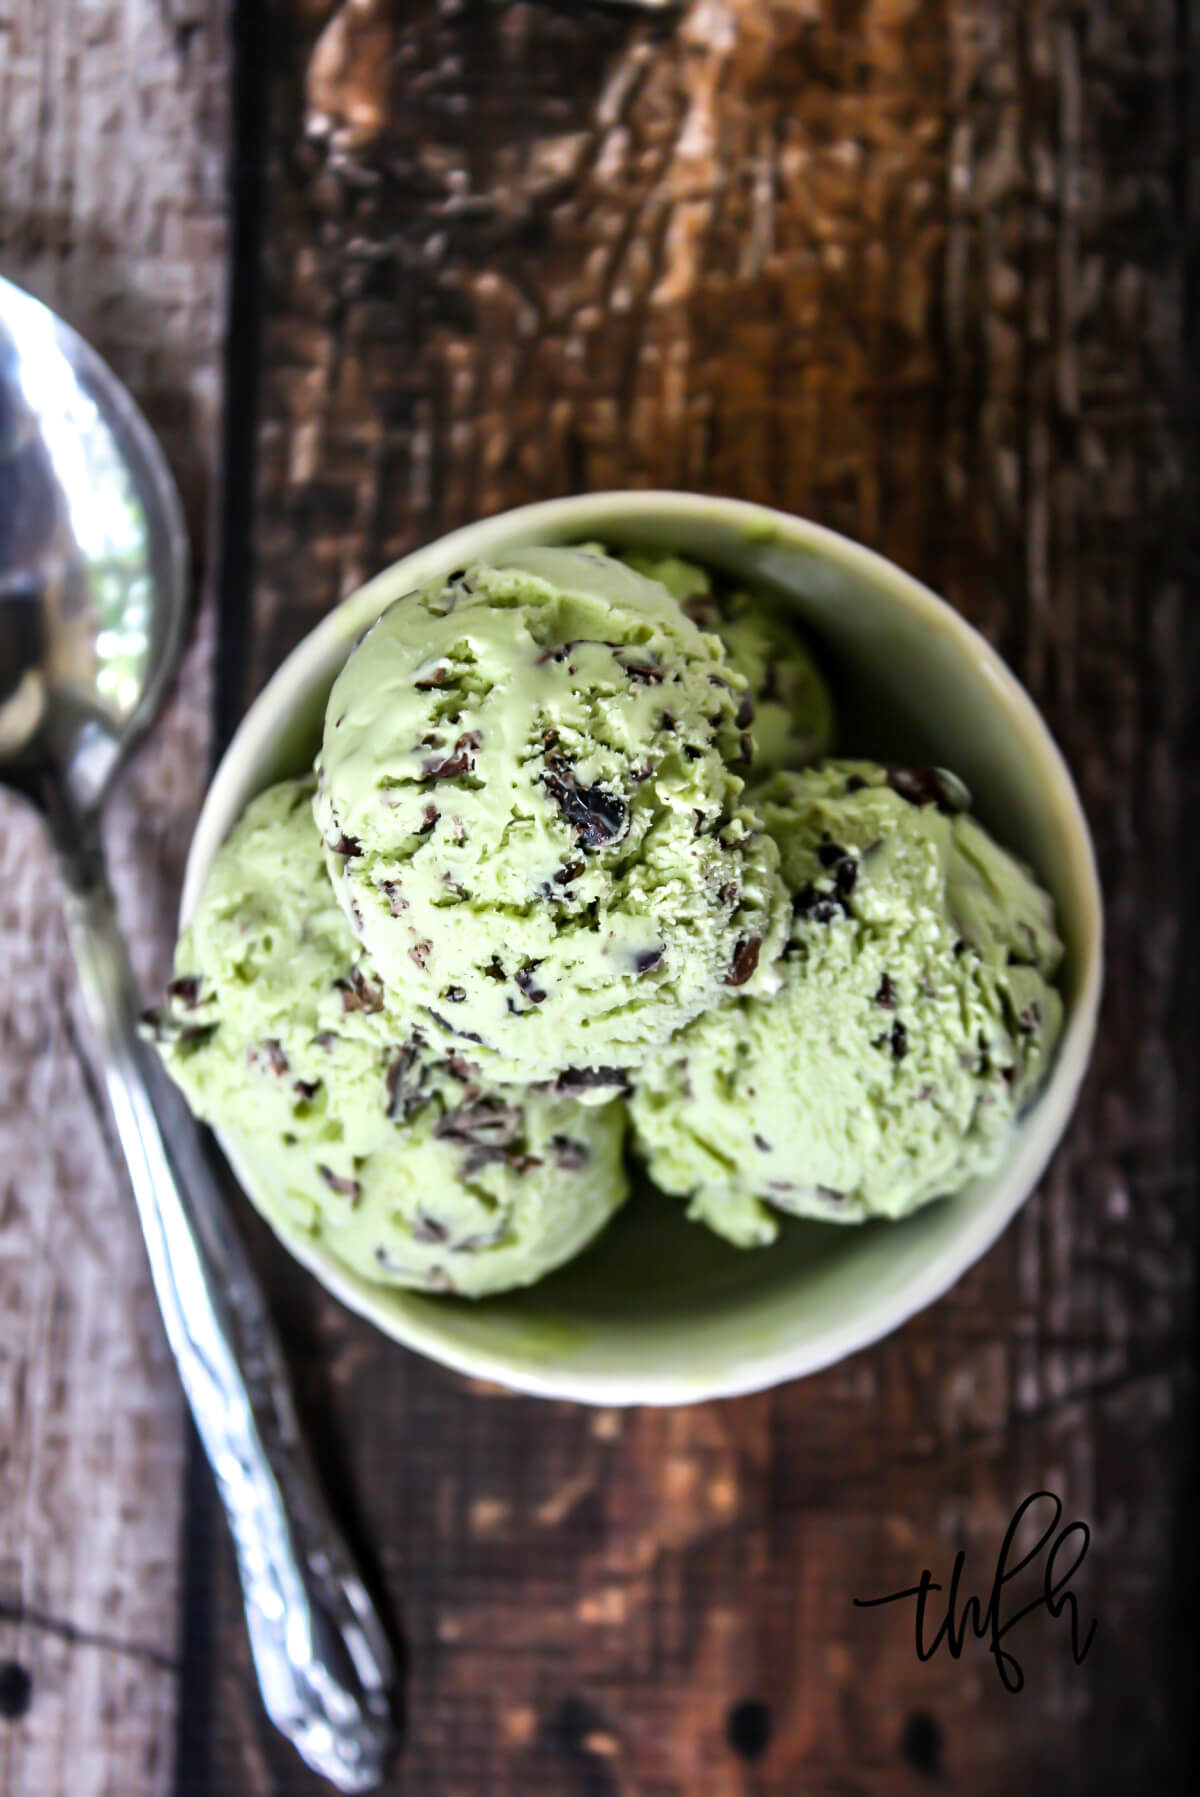 Overhead vertical image of a small bowl filled with light green ice cream on a weathered wooden surface